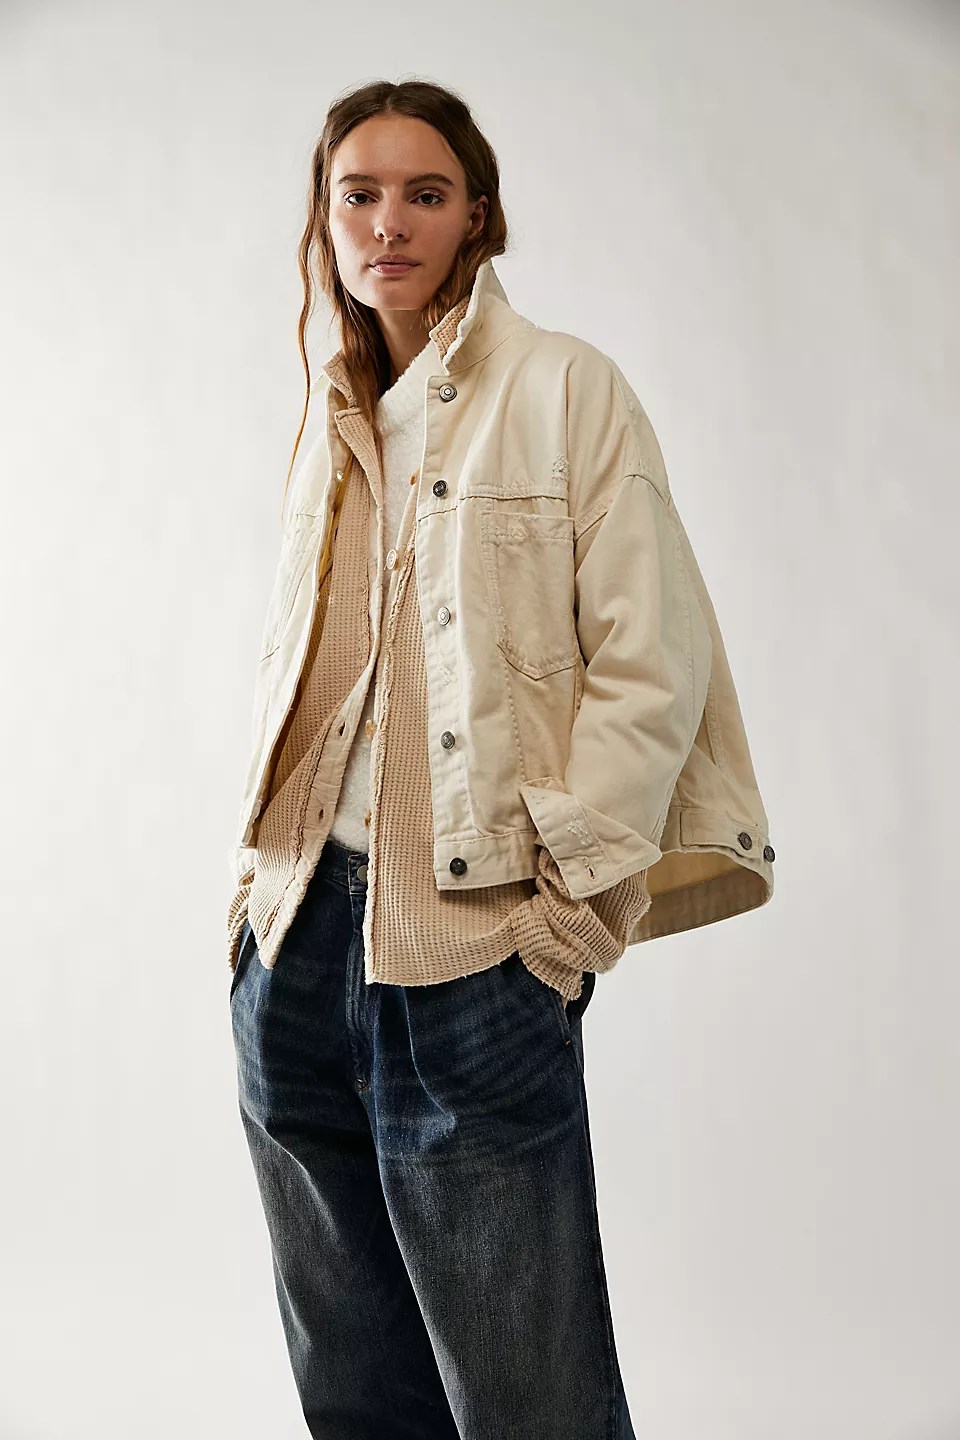 20 Stylish Spring Women's Jackets To Wear In 2023 | Well+Good